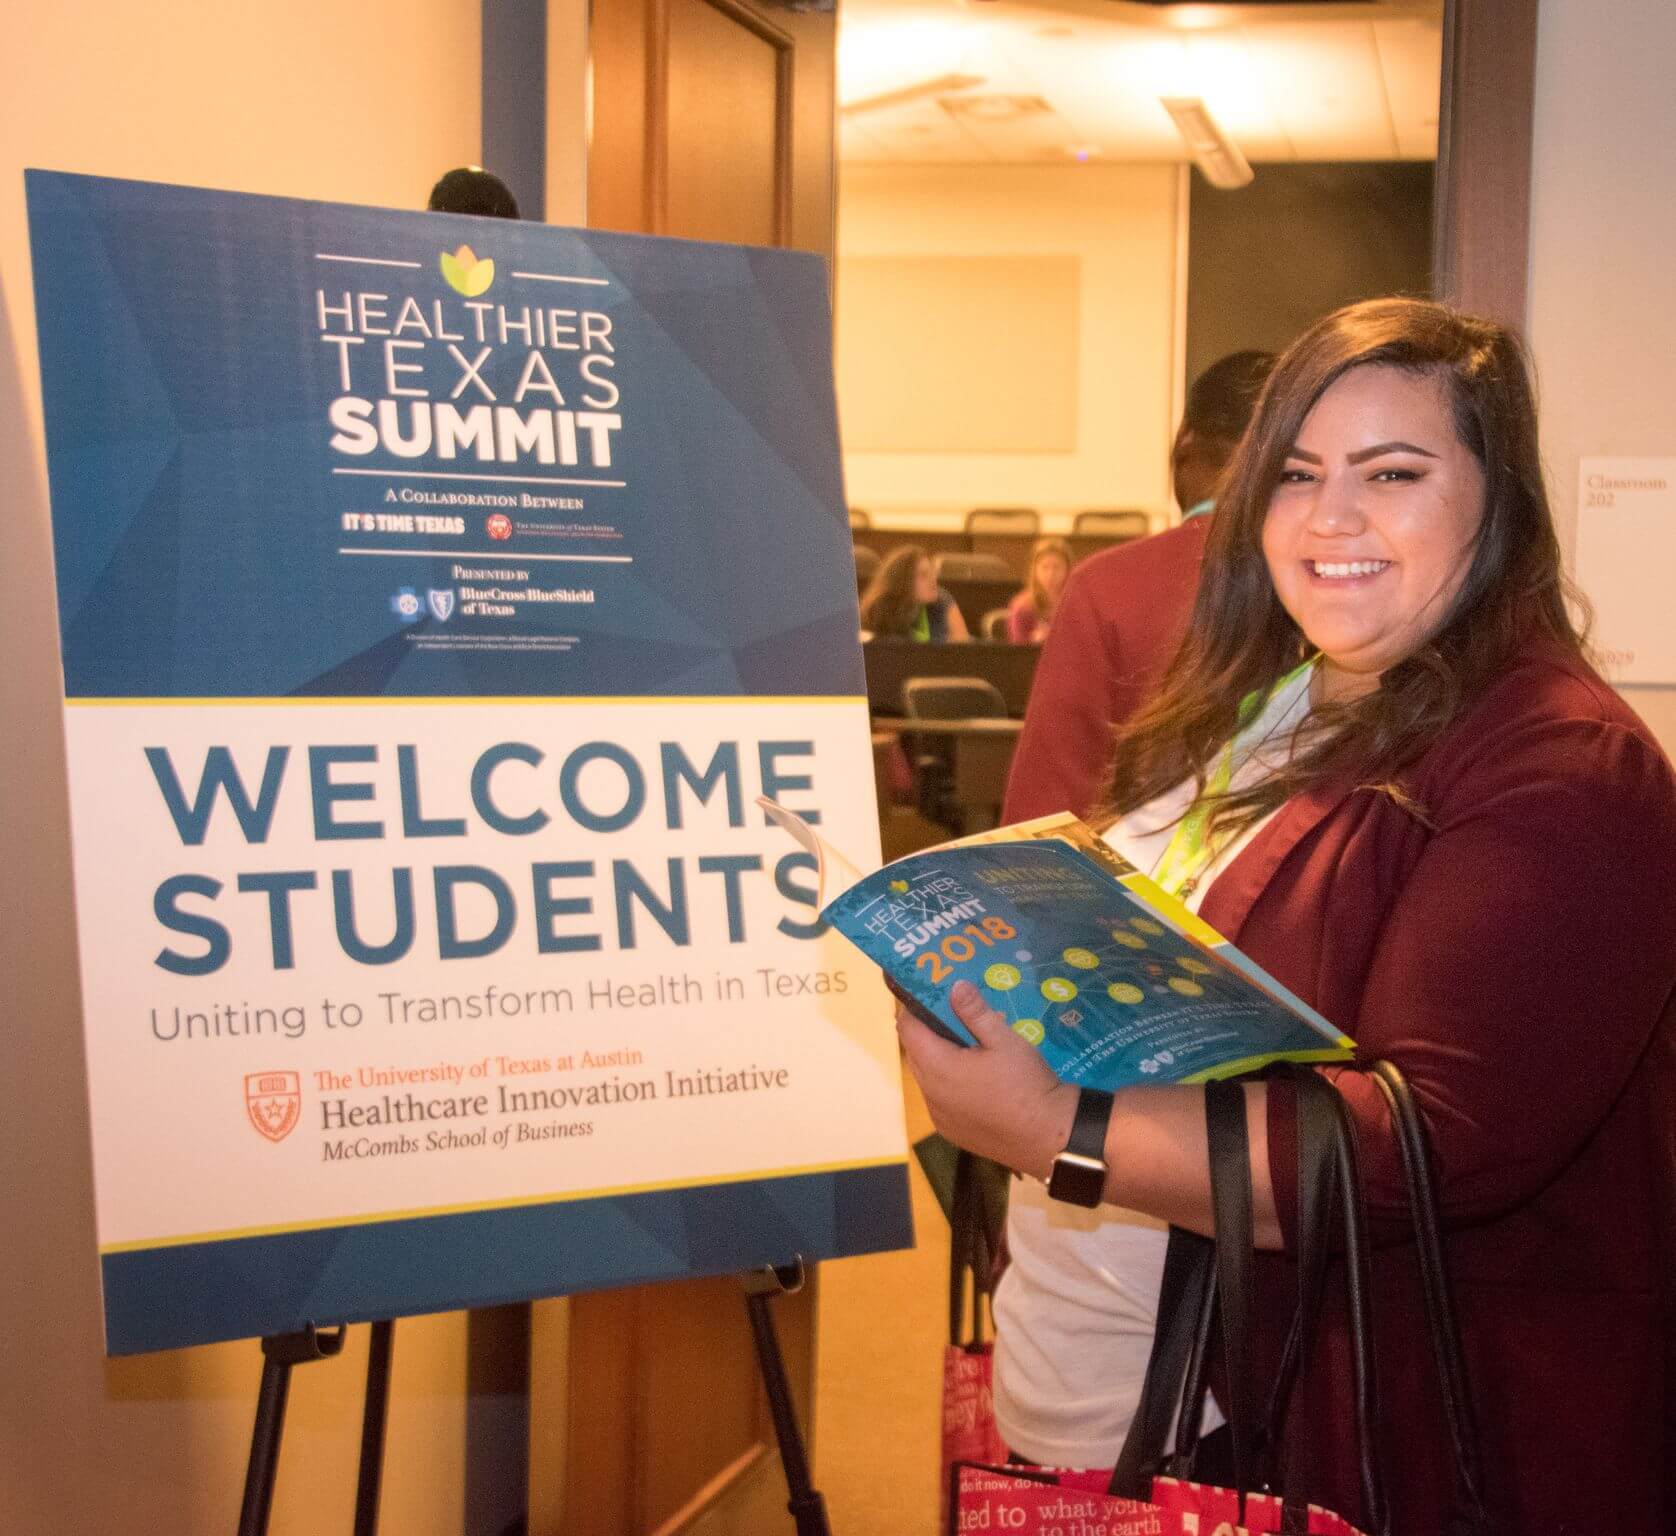 Student at the Healthier Texas Summit